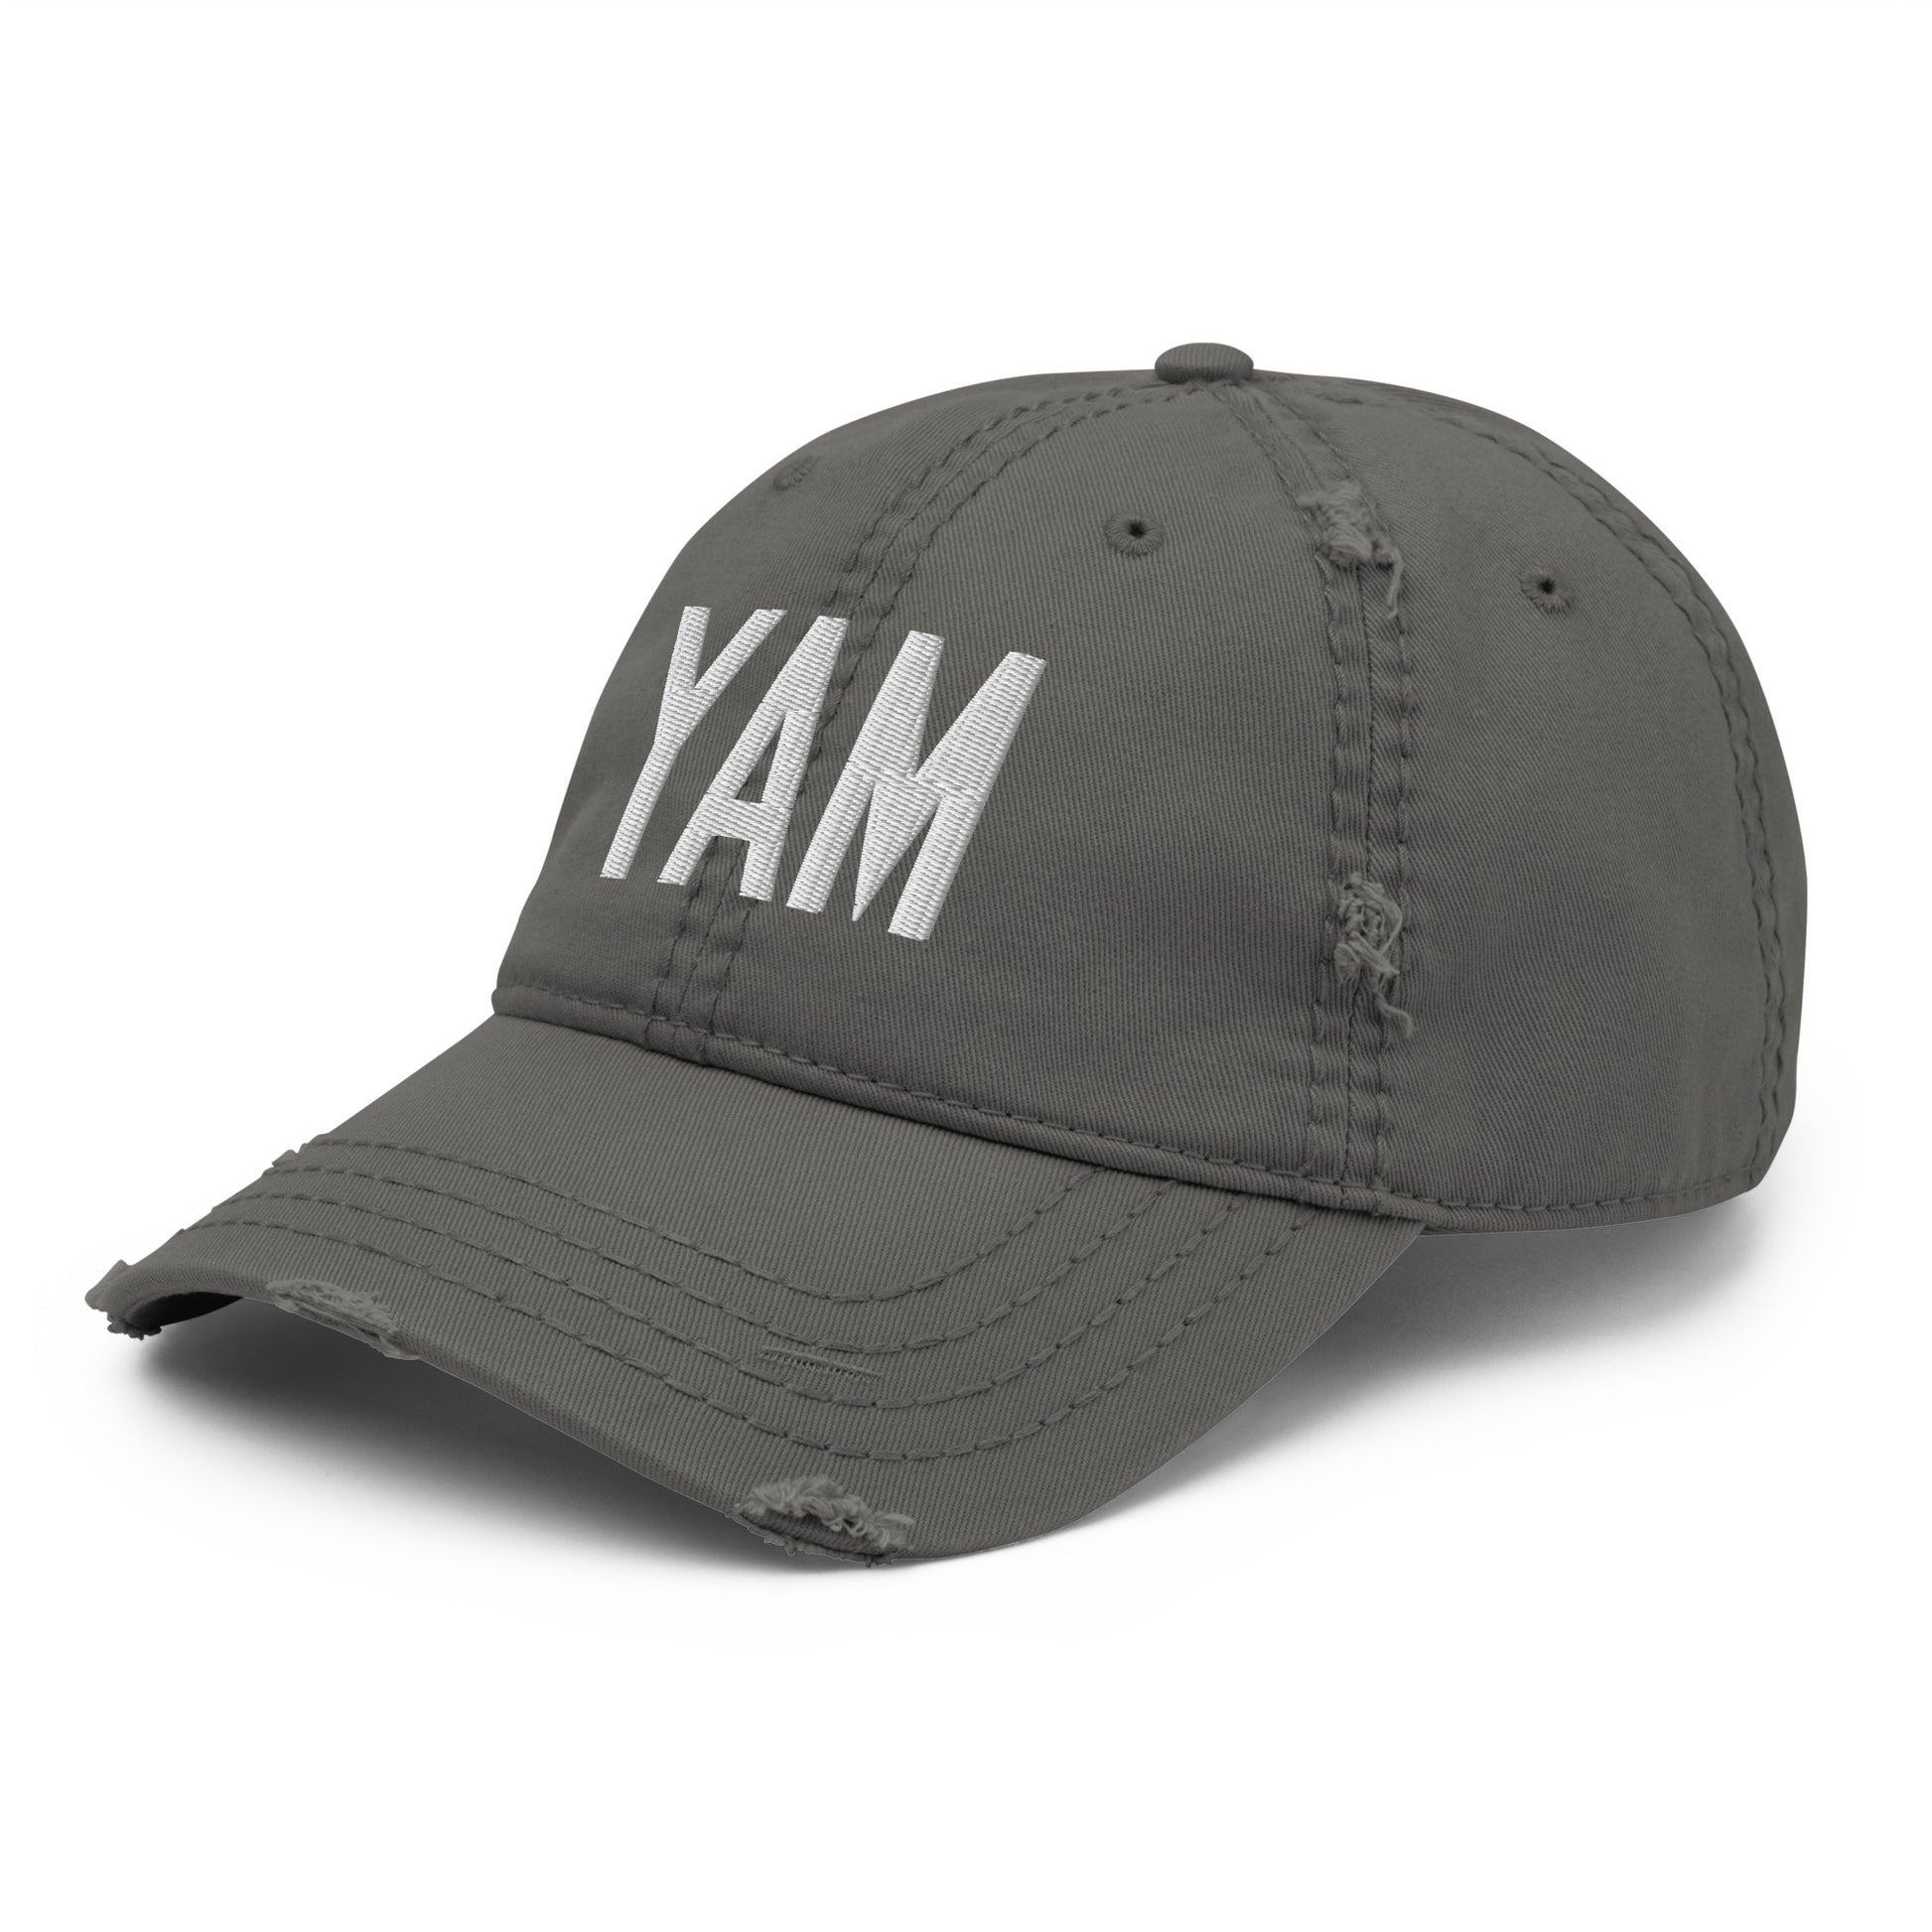 Airport Code Distressed Hat - White • YAM Sault-Ste-Marie • YHM Designs - Image 16